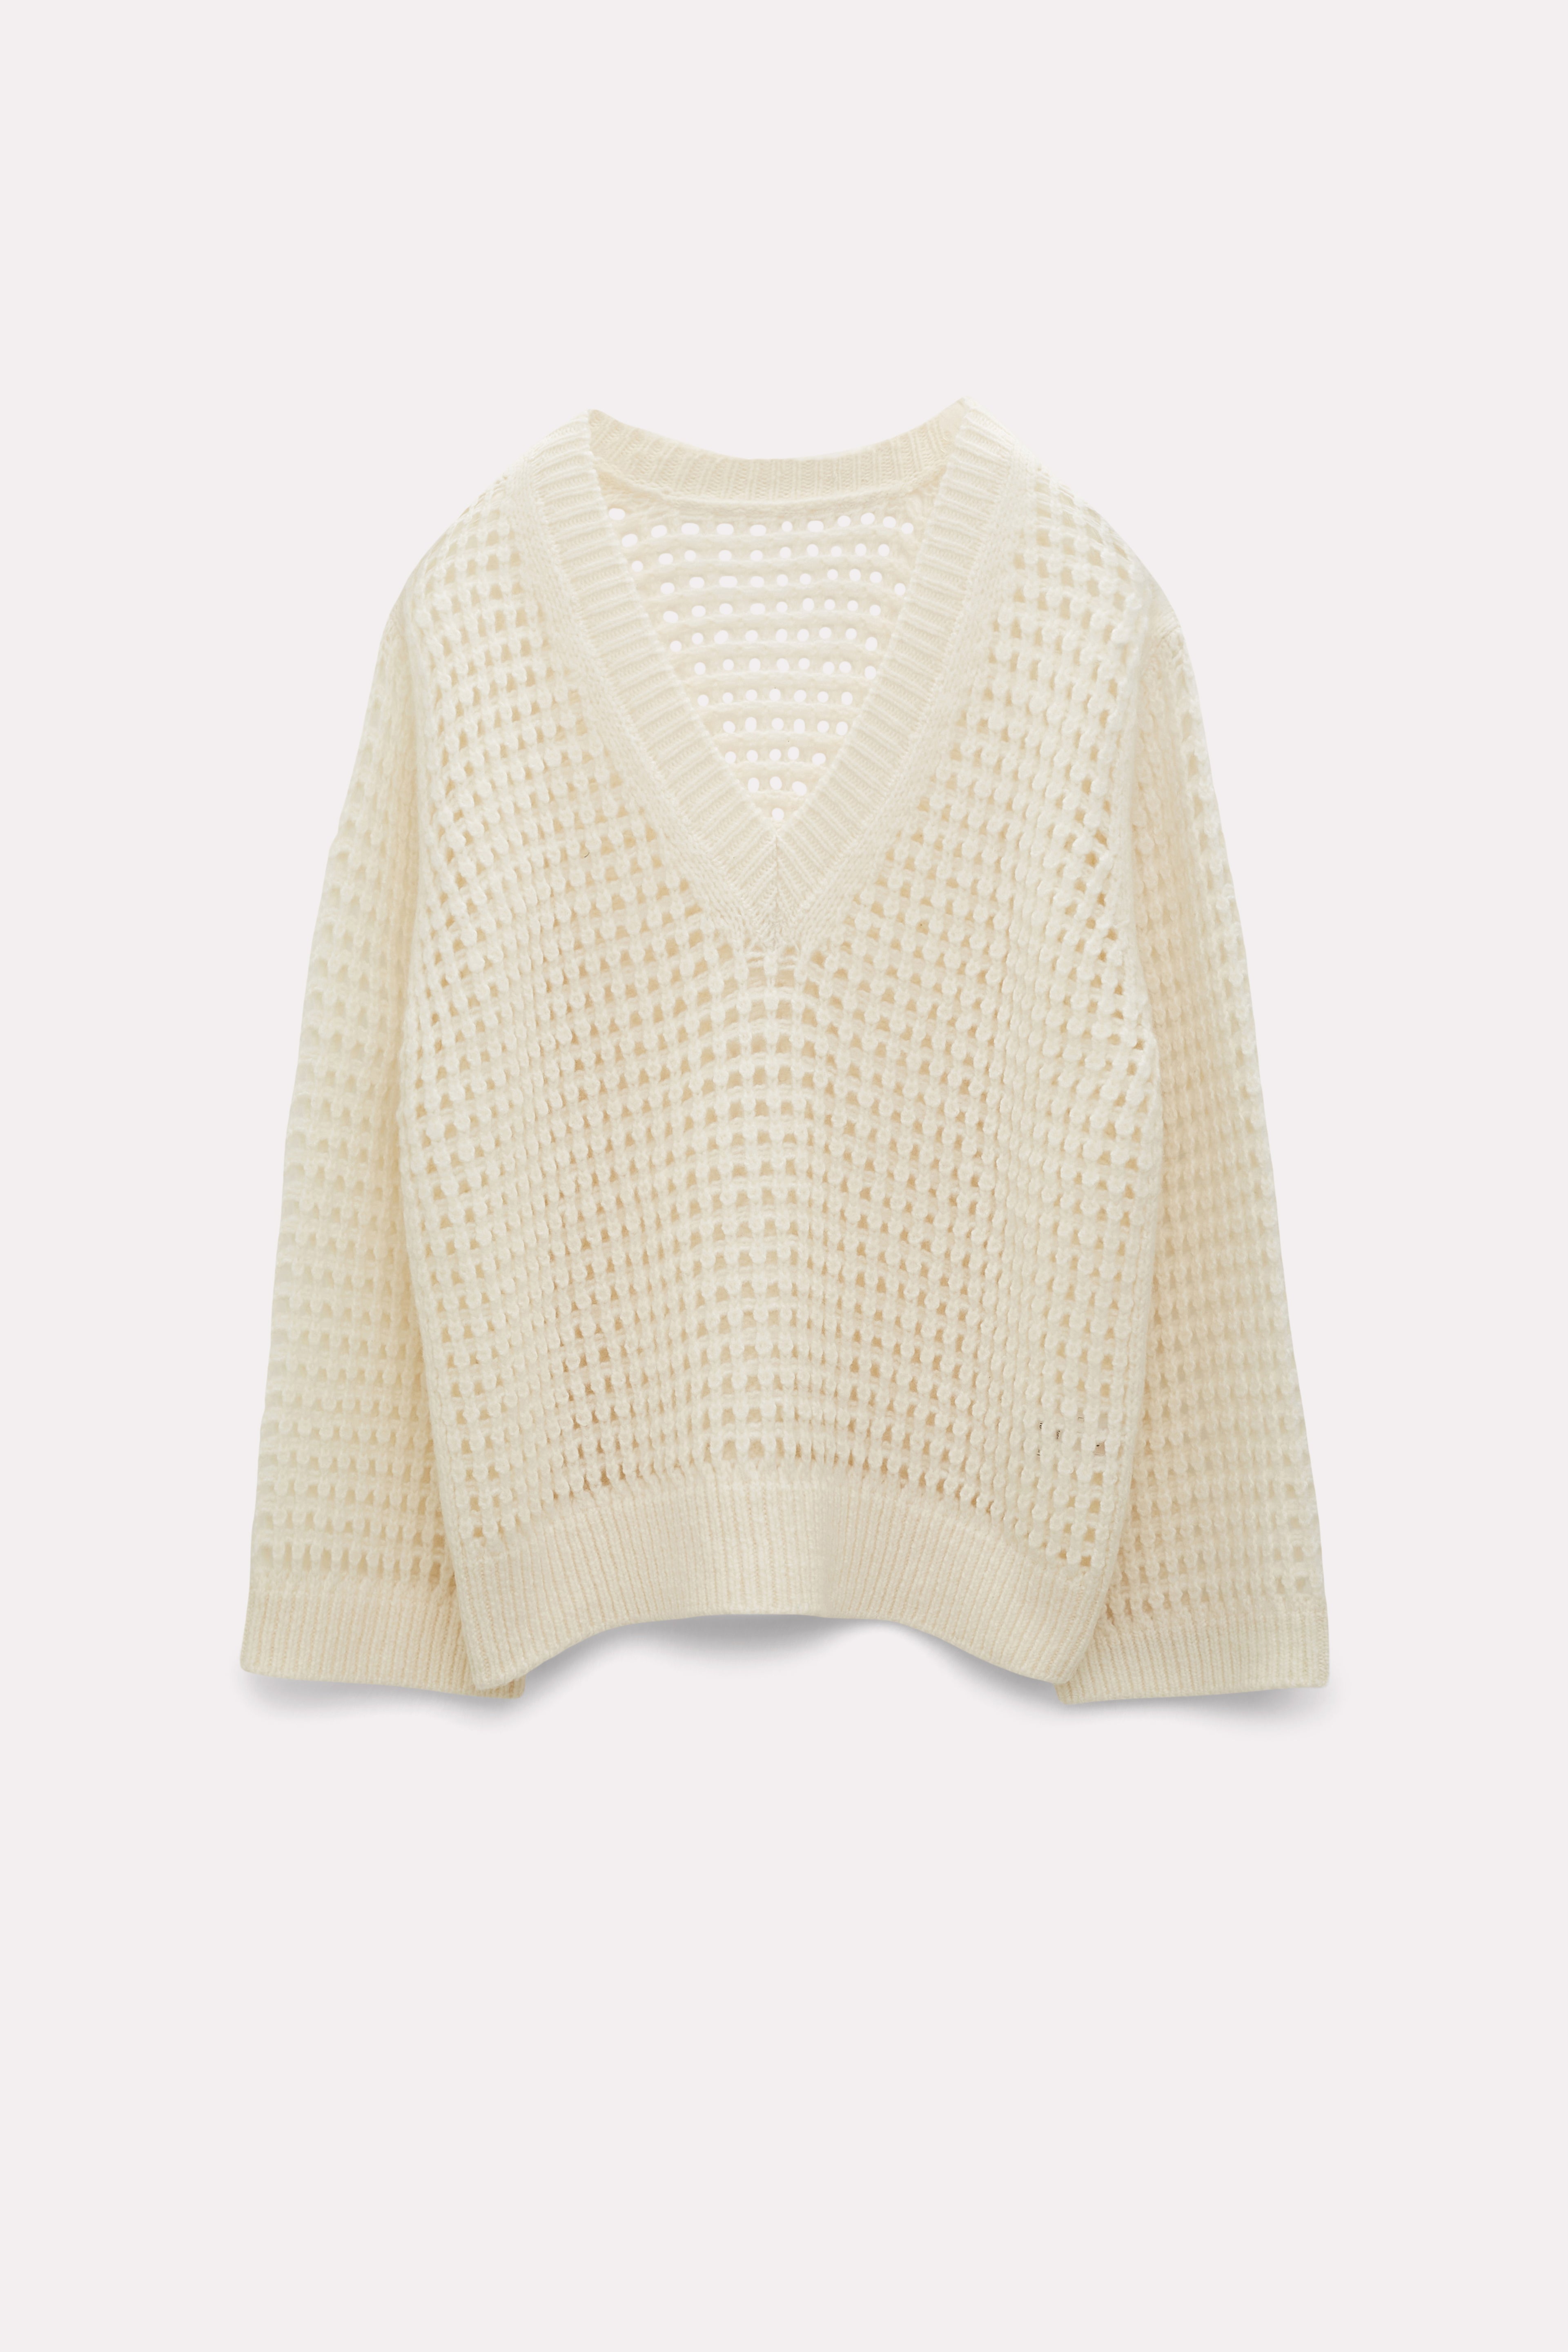 Dorothee-Schumacher-OUTLET-SALE-LUXURY-AIRINESS-pullover-Strick-ARCHIVE-COLLECTION.jpg